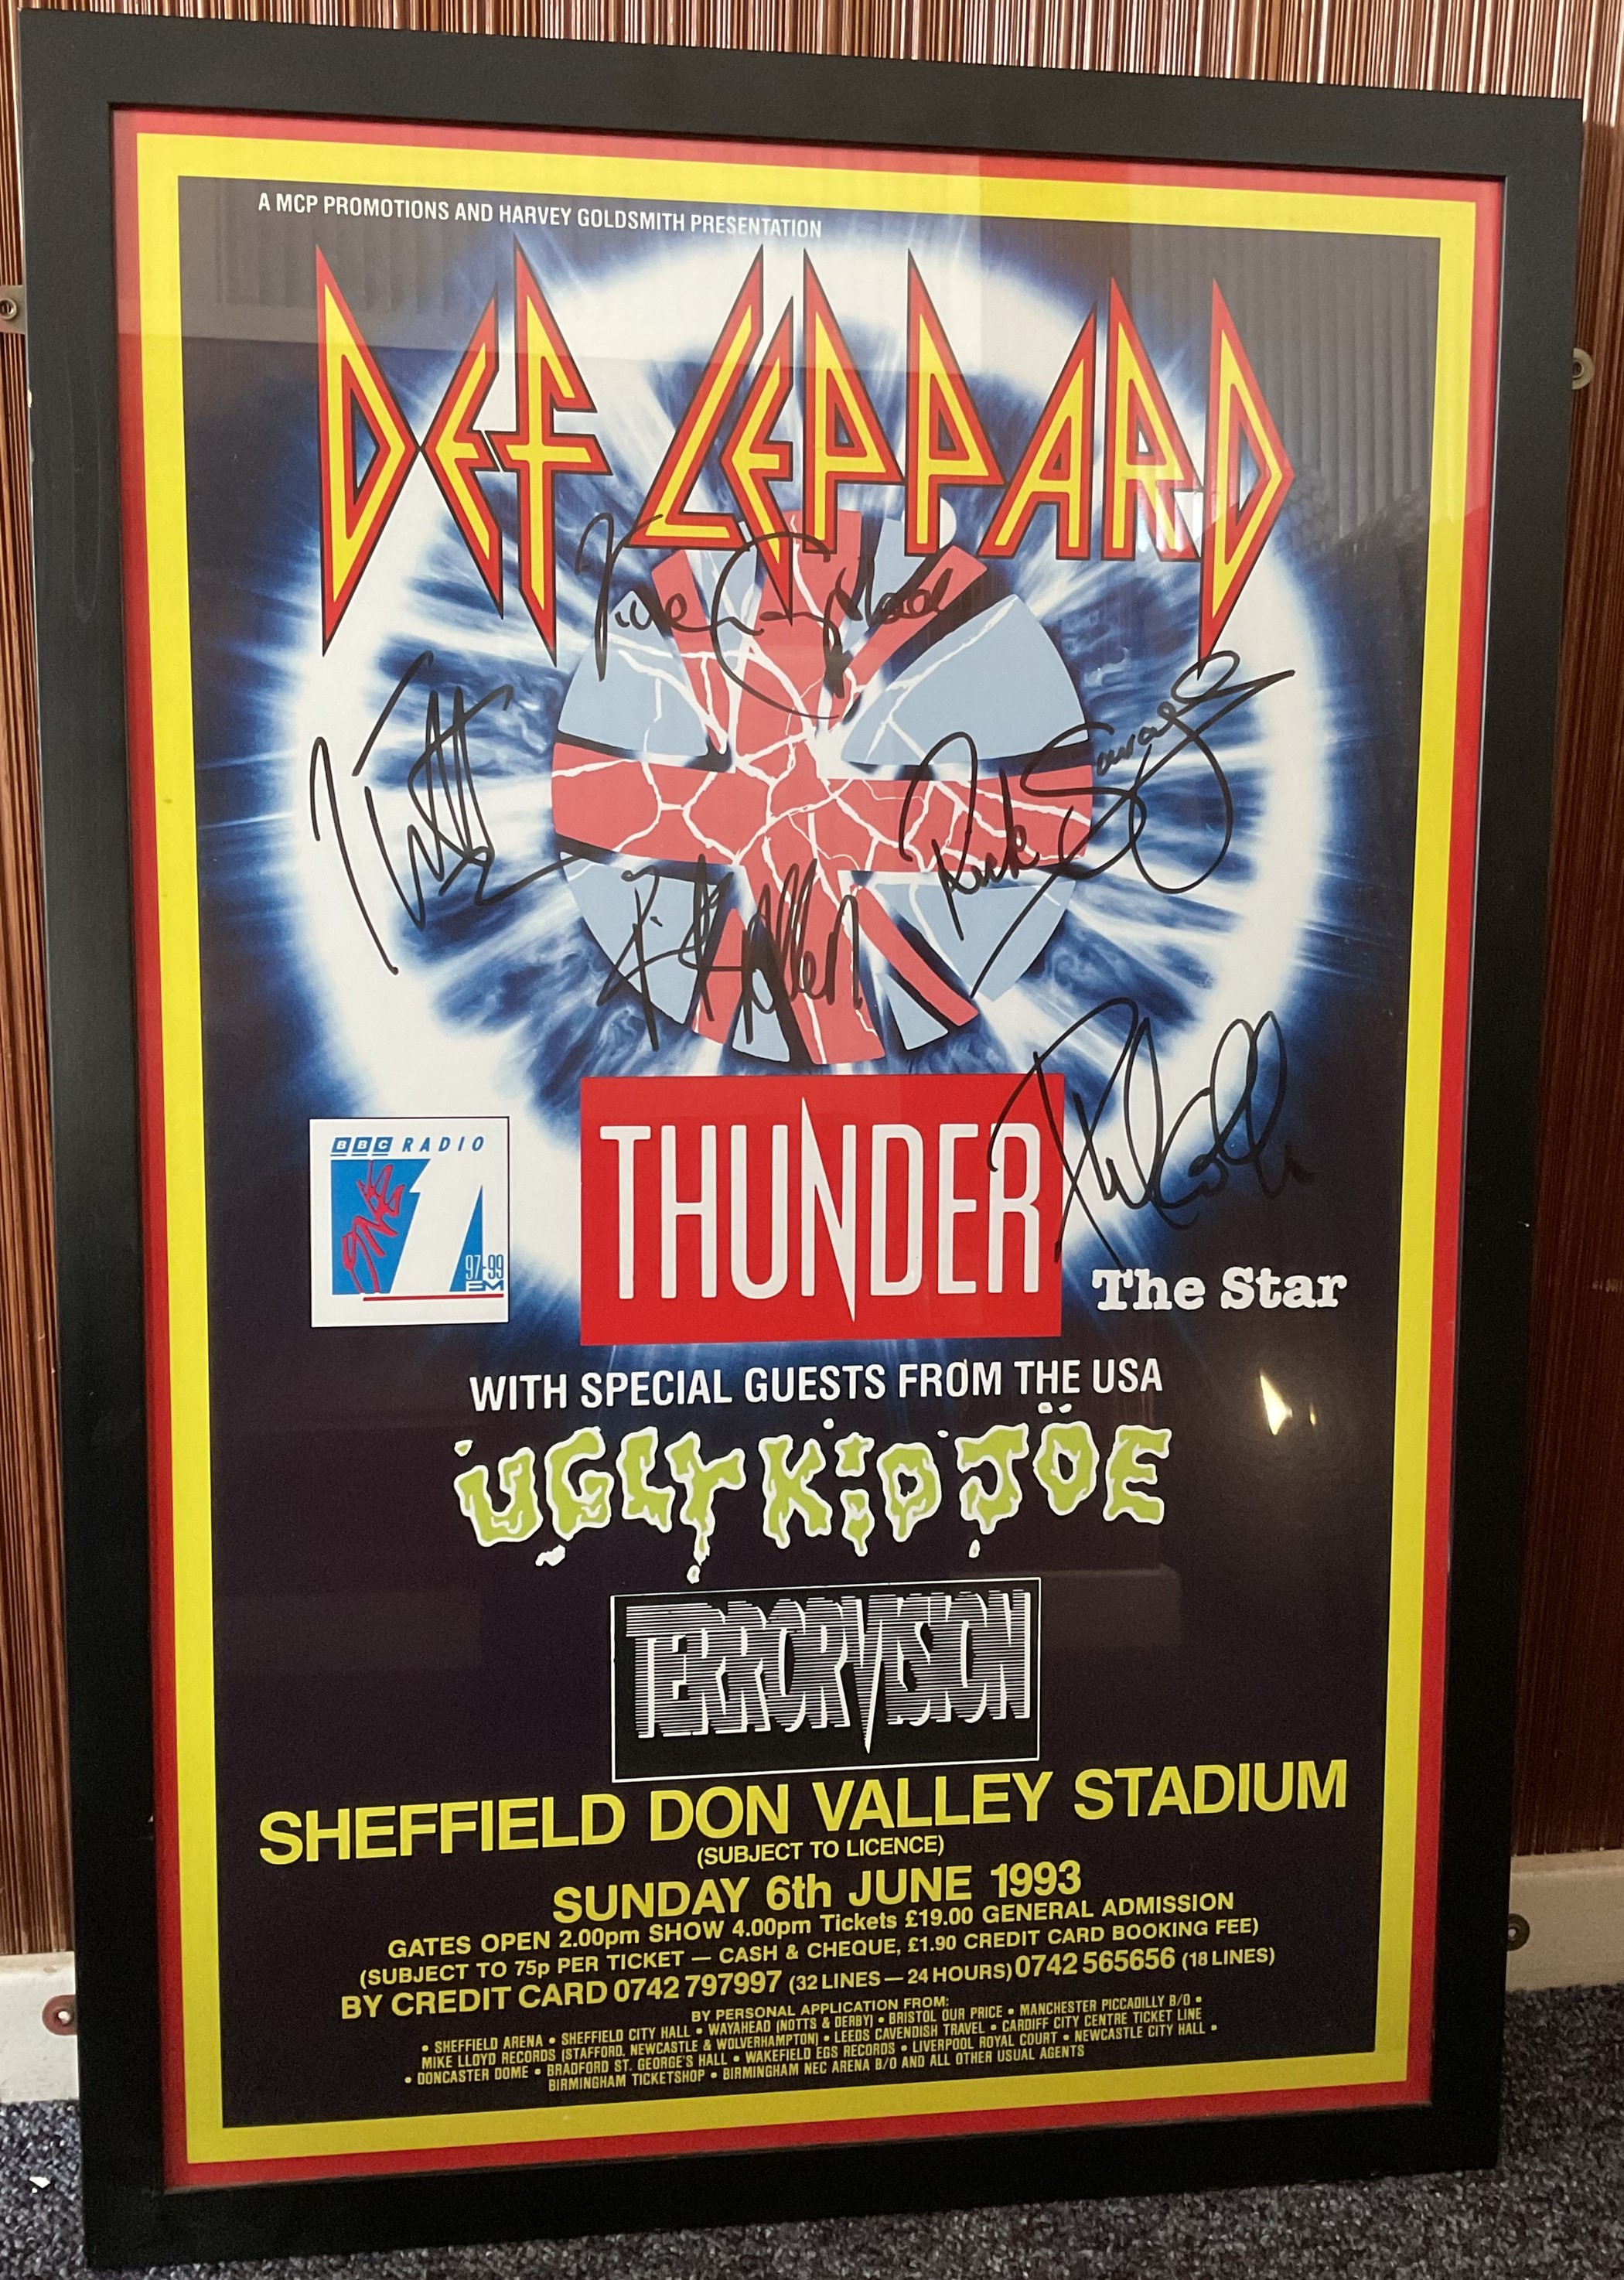 Def Leppard framed multi-signed concert poster with 5 signatures from band members across the